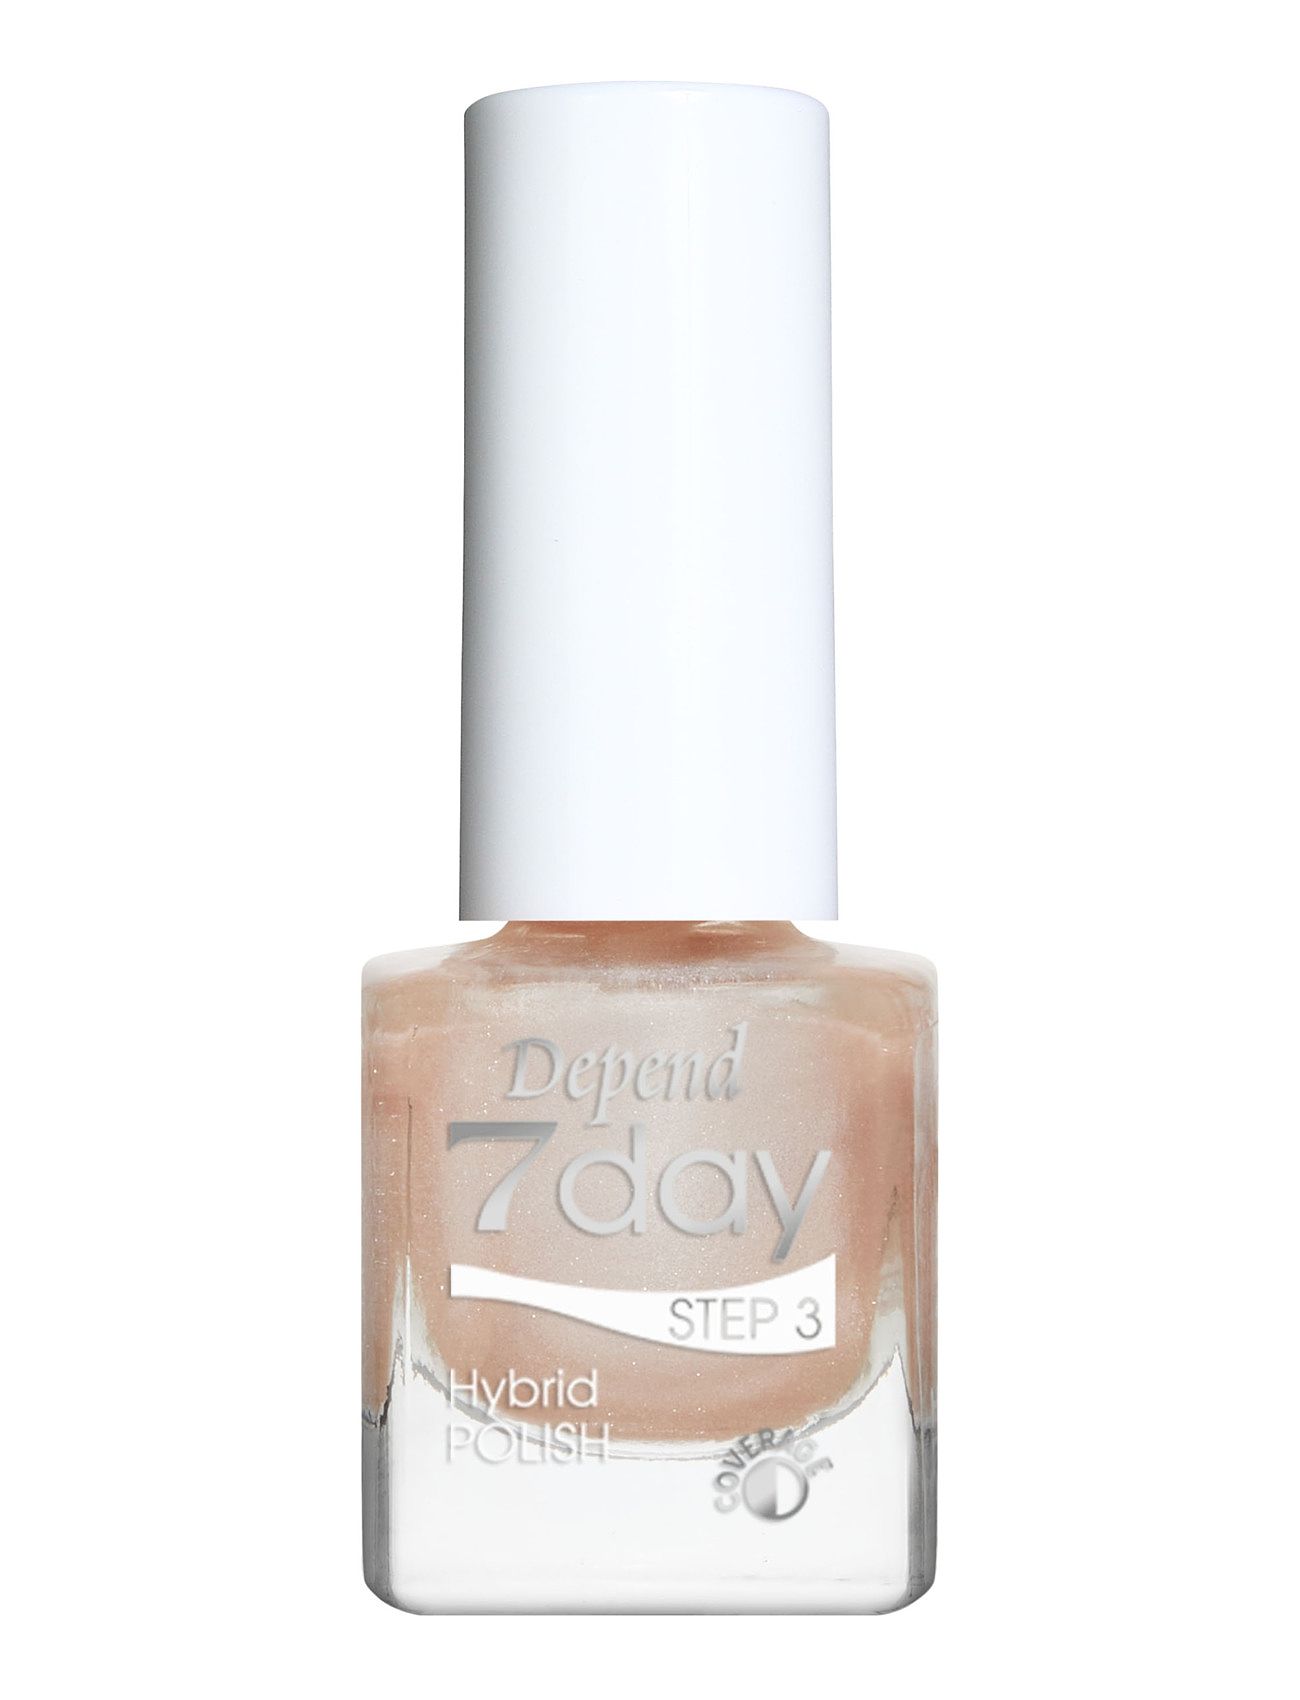 7Day Hybrid Polish 7306 Nagellack Smink Coral Depend Cosmetic